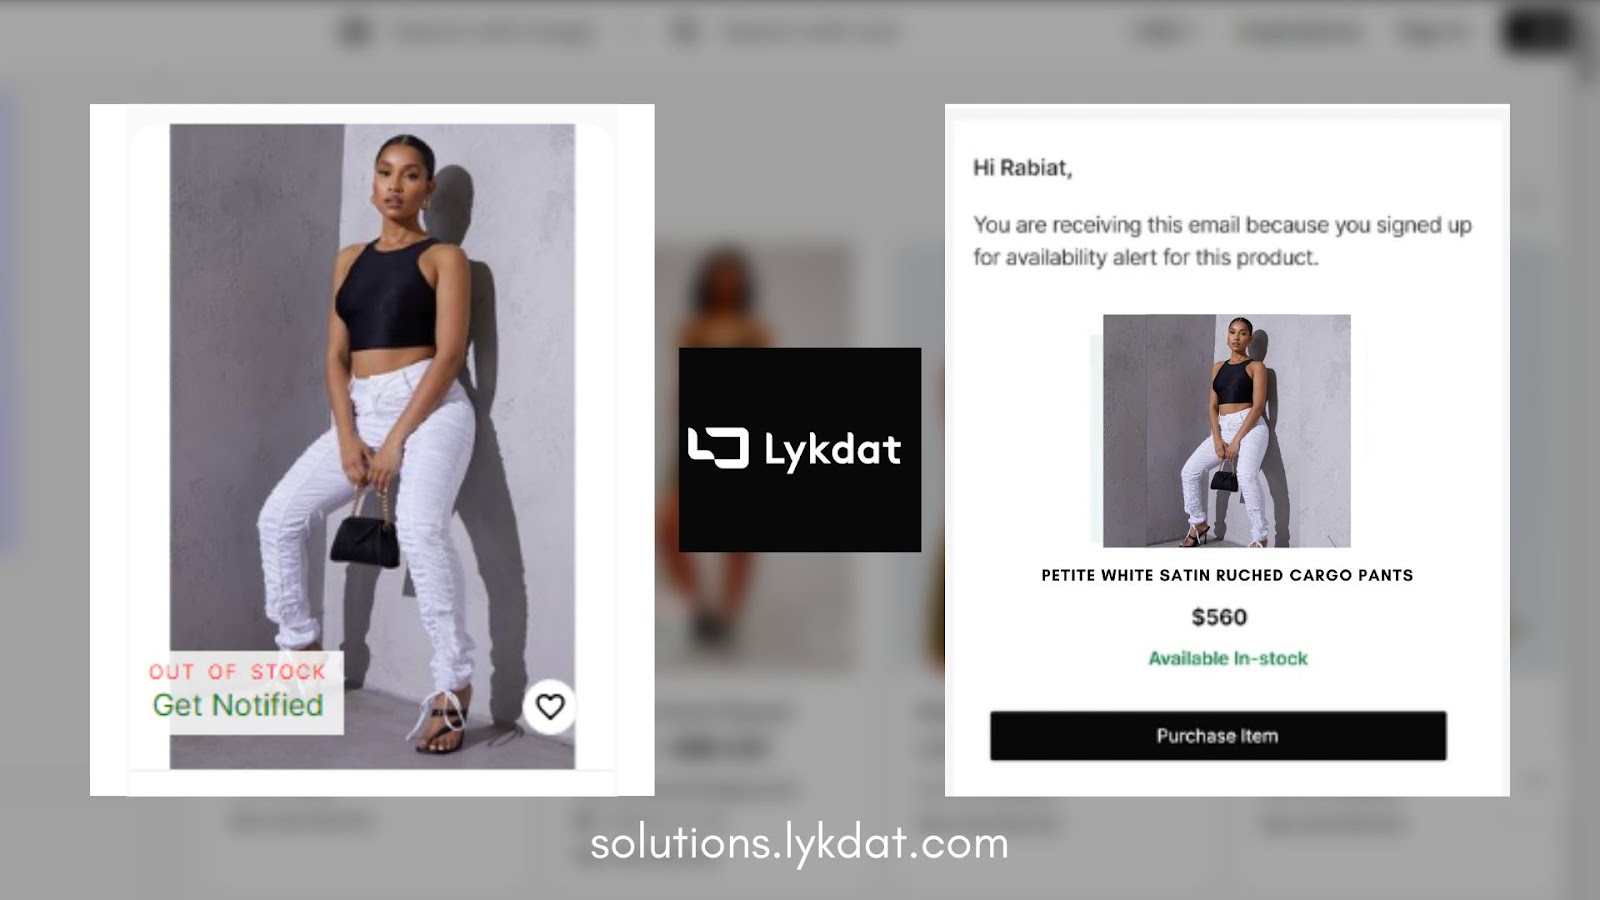 Back-In-Stock Product Alerts by Lykdat